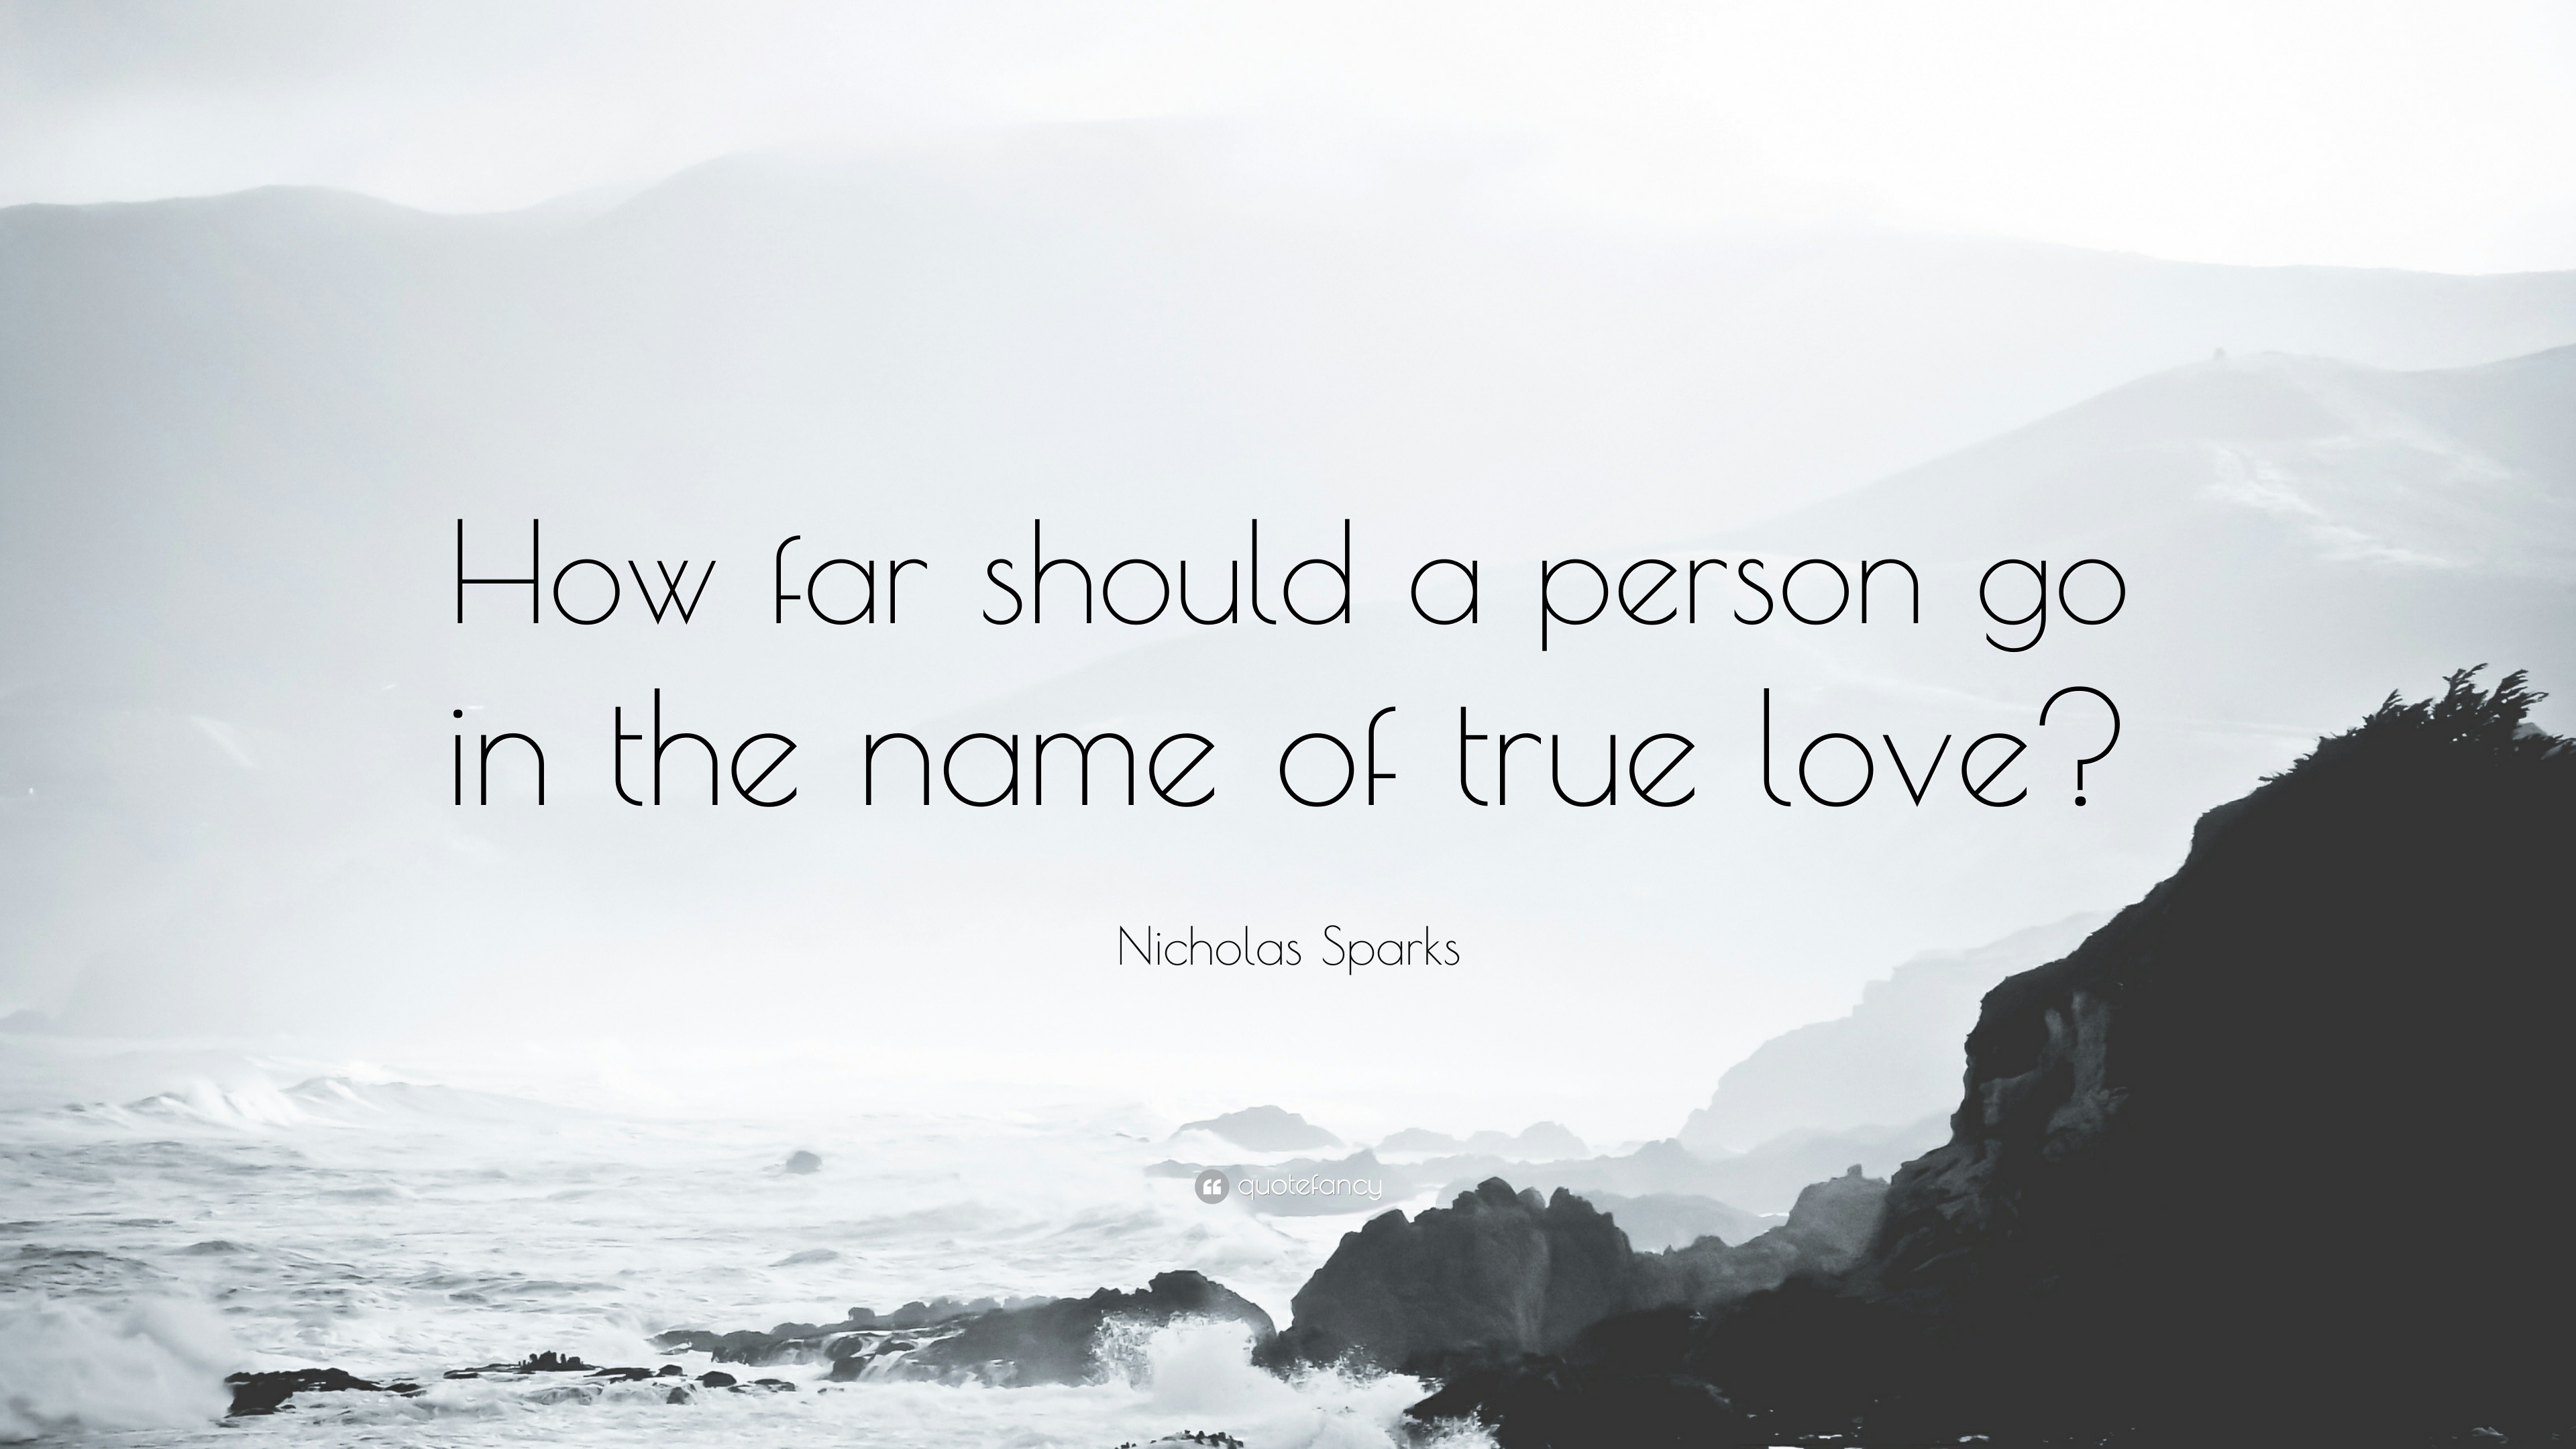 Nicholas Sparks Quote How Far Should A Person Go In The Name Of True Love